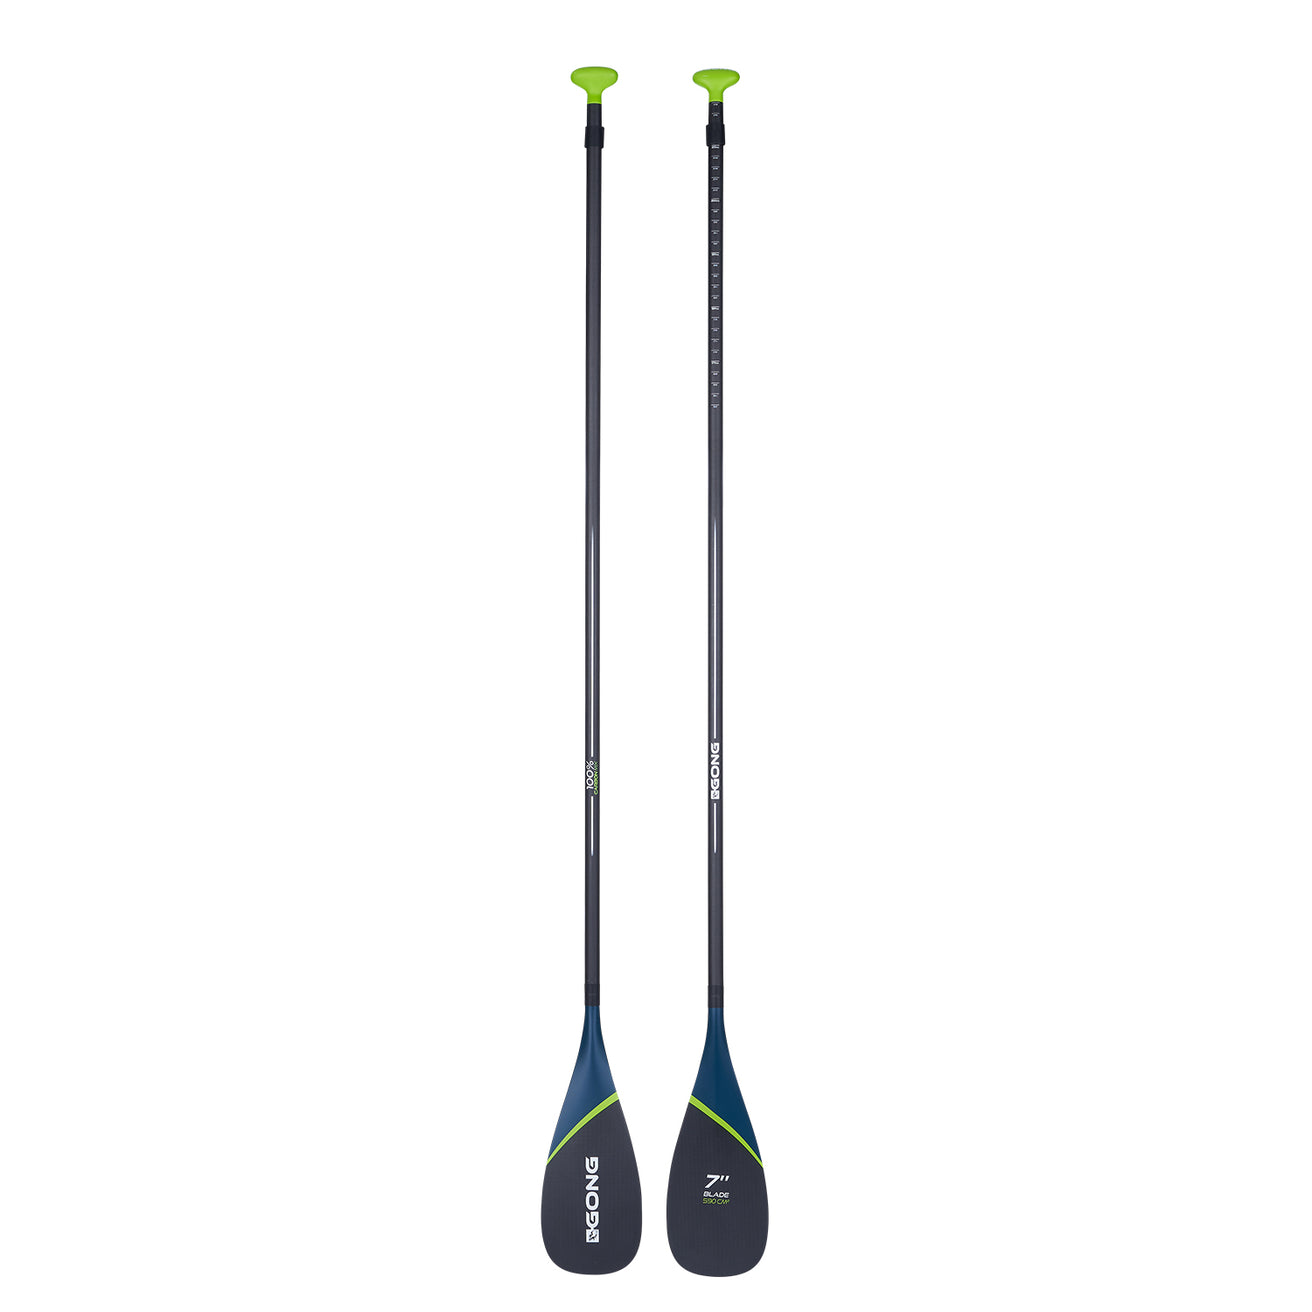 Pack SUP Alley FSP Pro